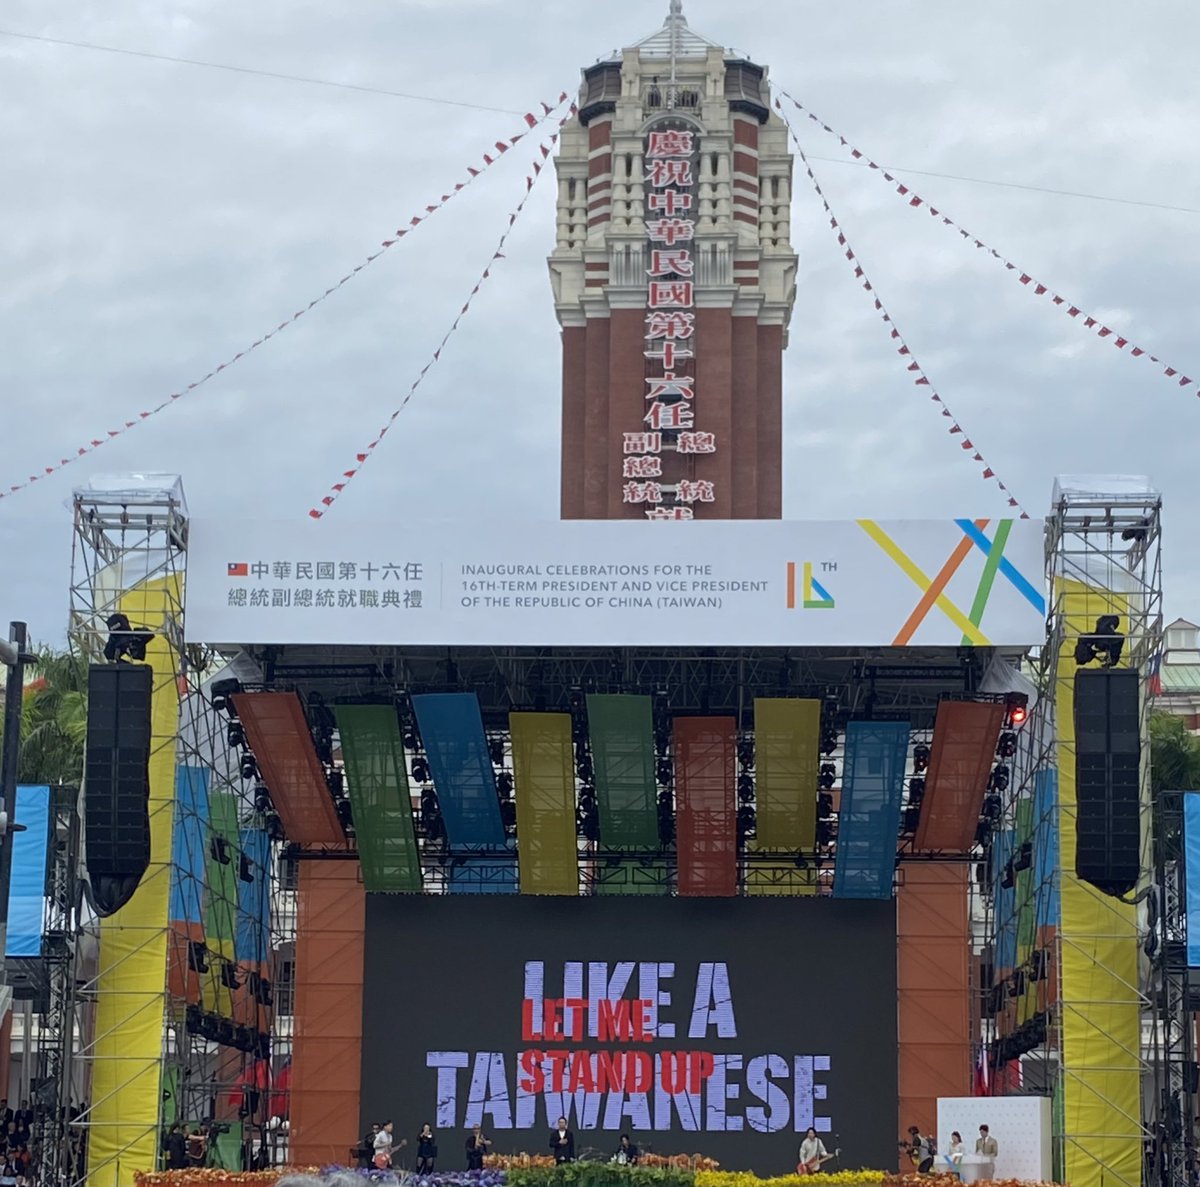 A message for Taiwan, from Taiwan! “Let me standup like a Taiwanese” (Last performance before @ChingteLai’s first address to the nation as the president of Taiwan)